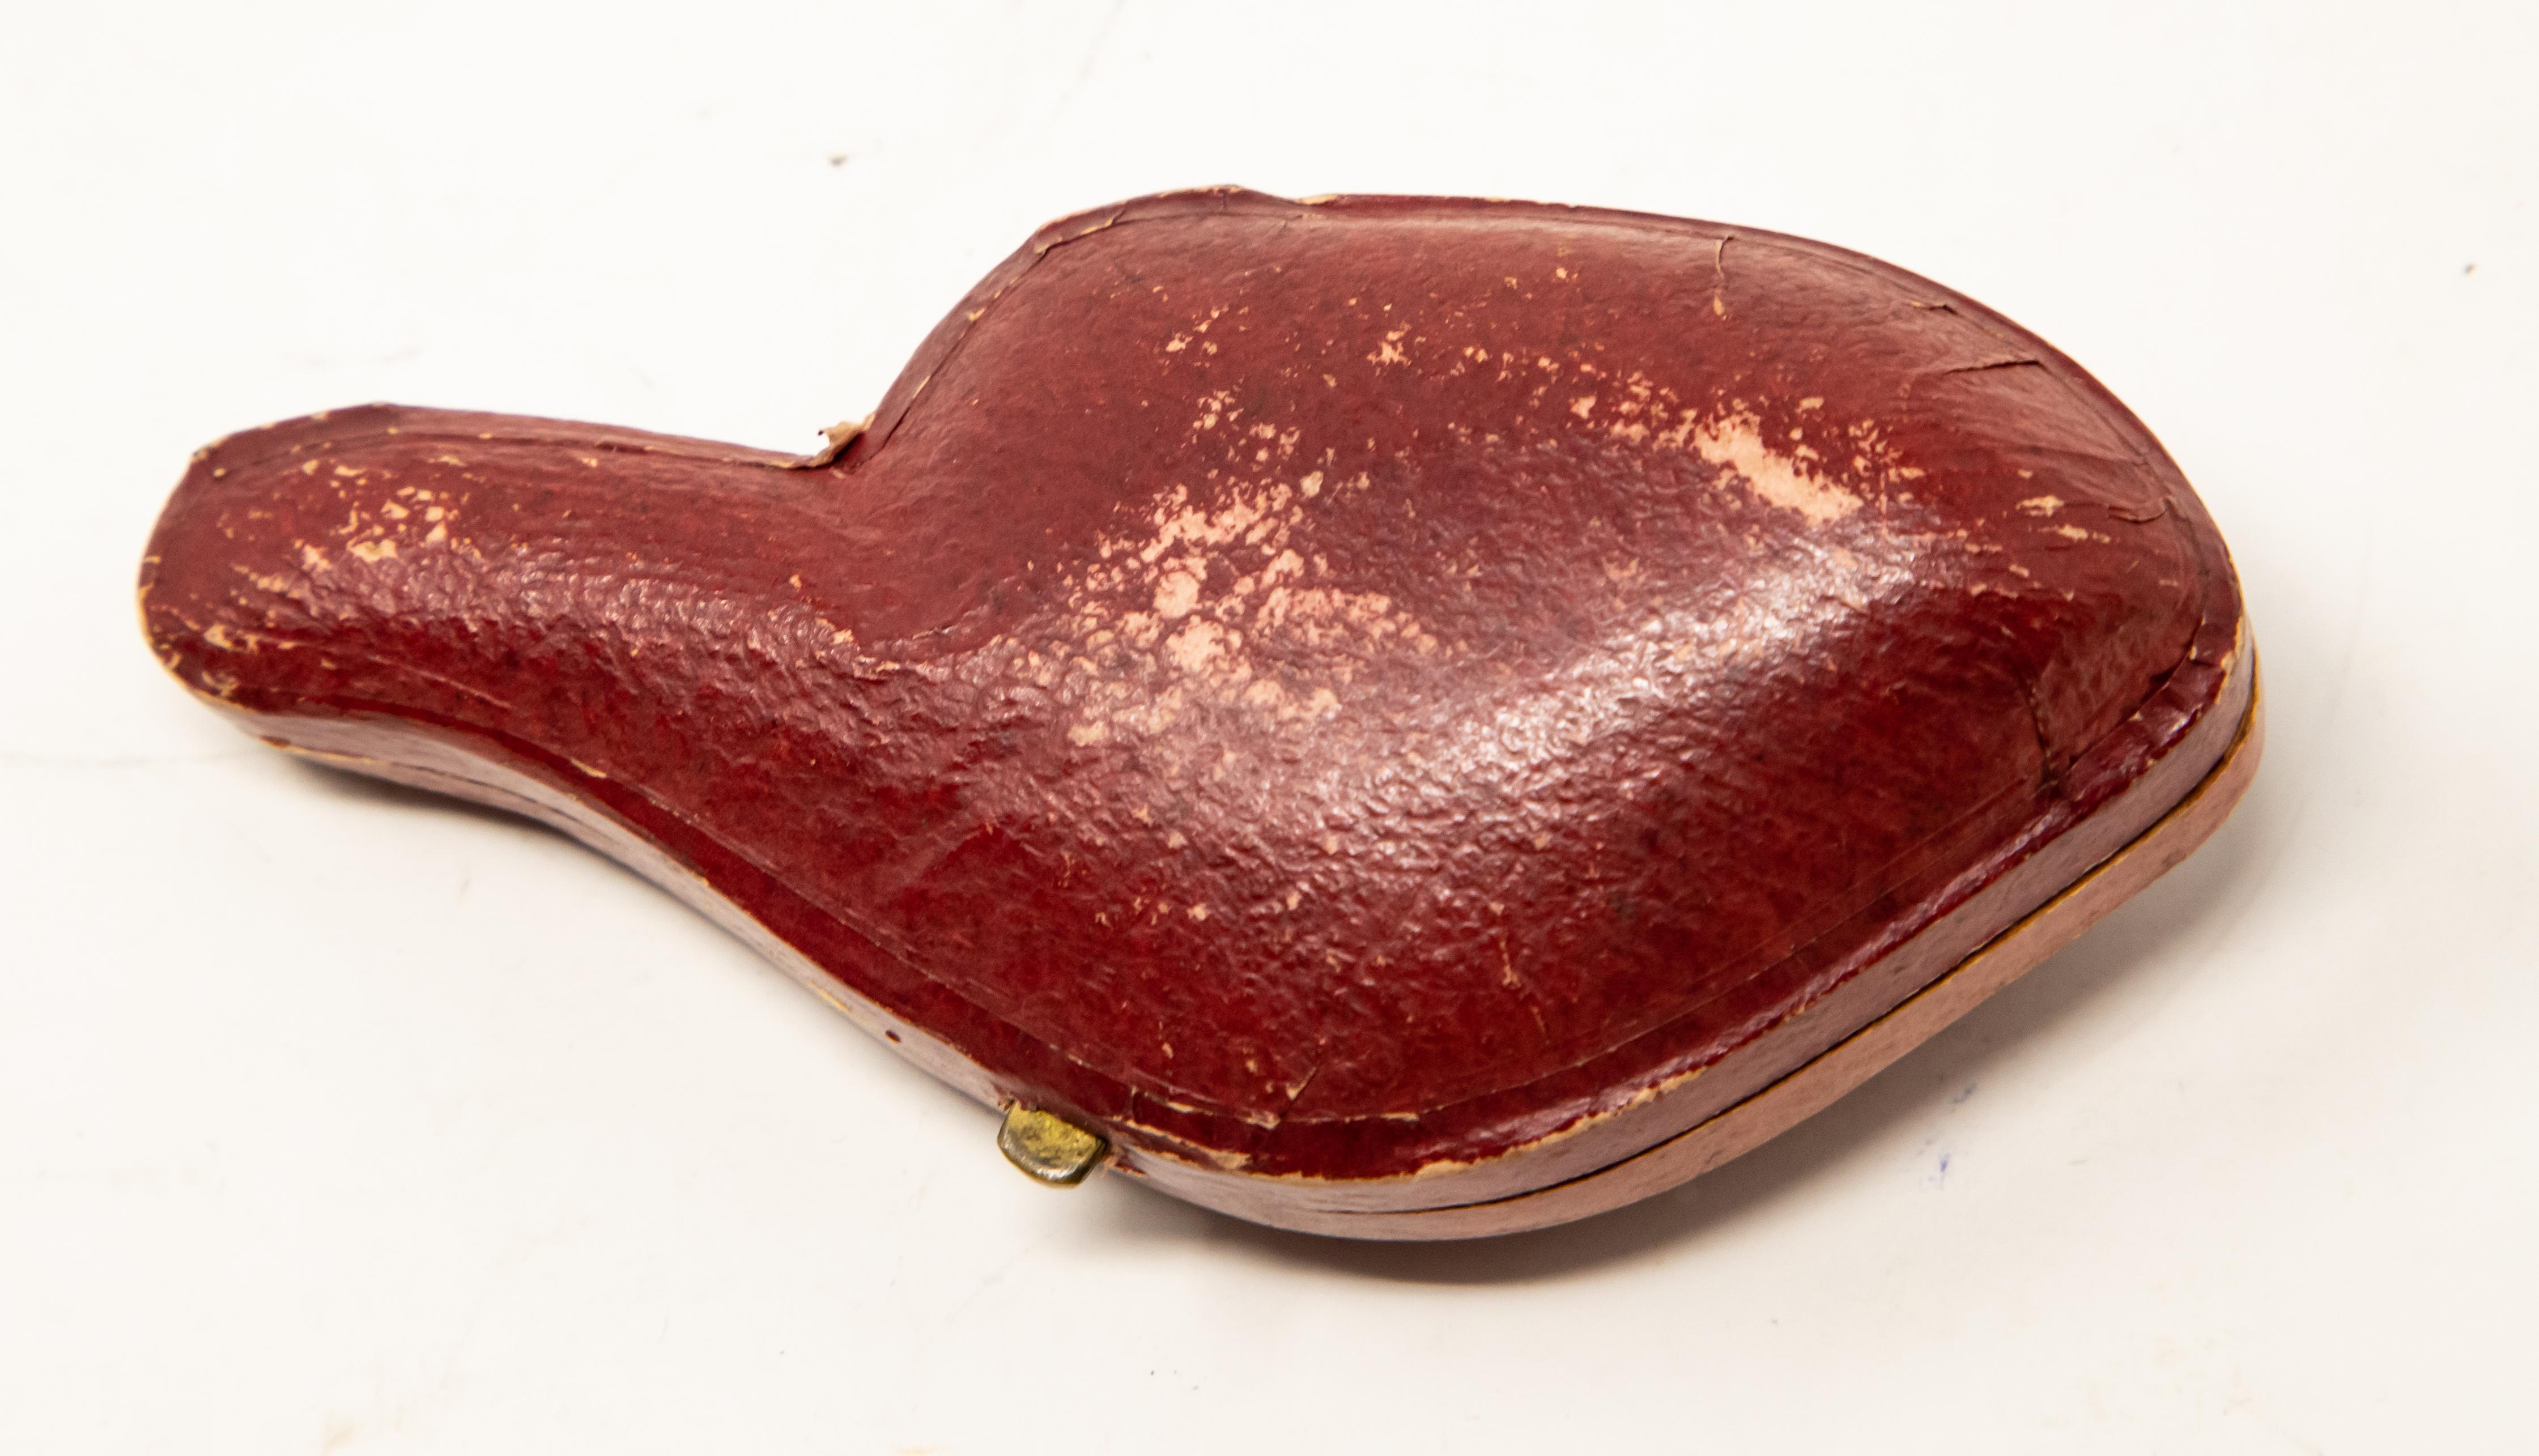 Offering this magnificent hand carved tobacco pipe. The case is a hard shell wrapped in a red leather. The pipe has an amber colored mouthpiece and a gorgeous body. The main body has a Horse that has been hand carved.